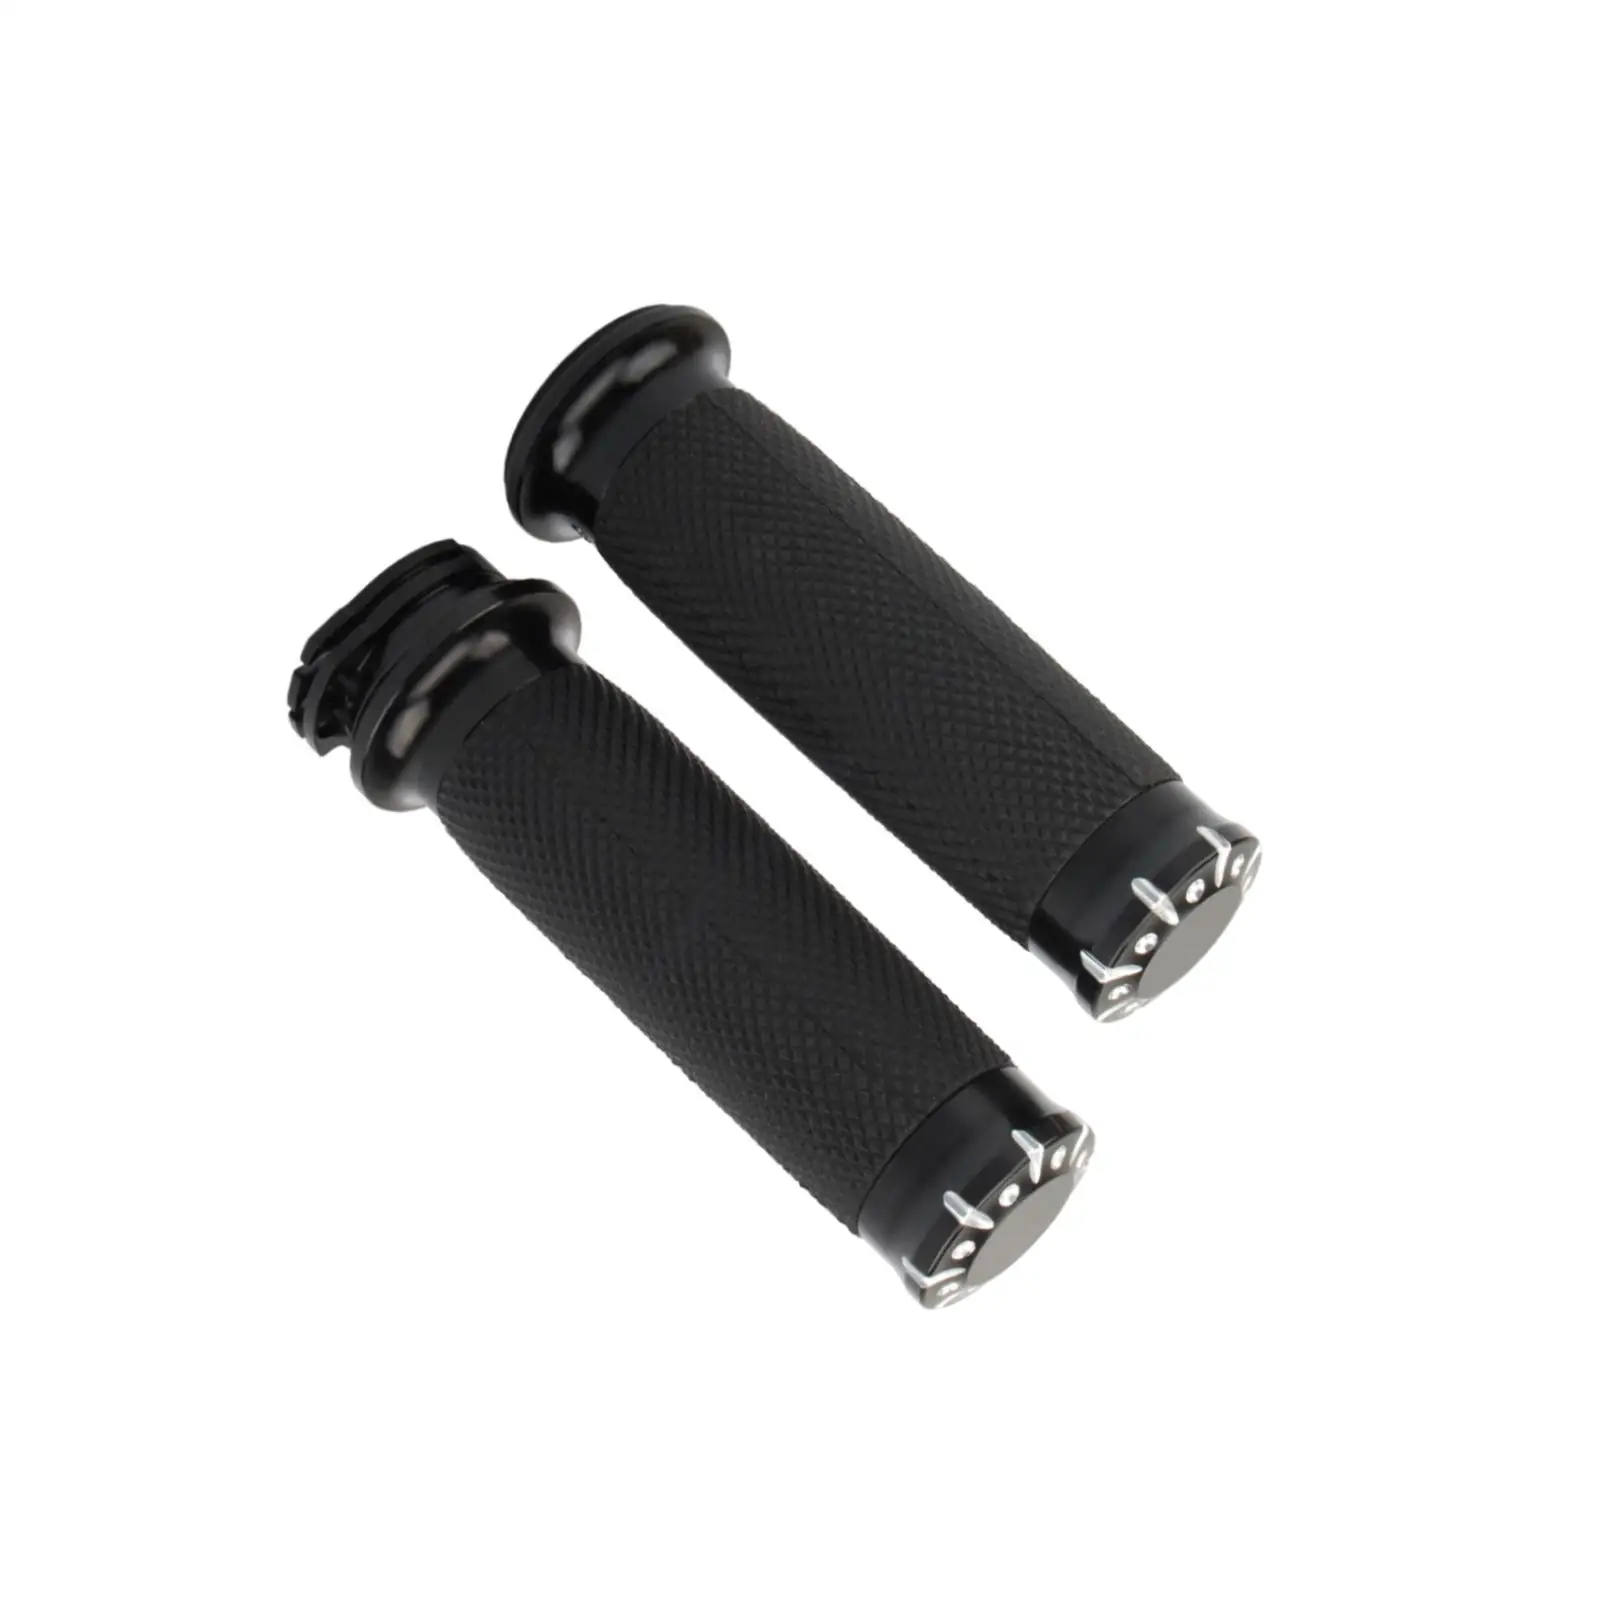 Hand Grips Easily Install Anti Slip Universal Replace Parts for Harley